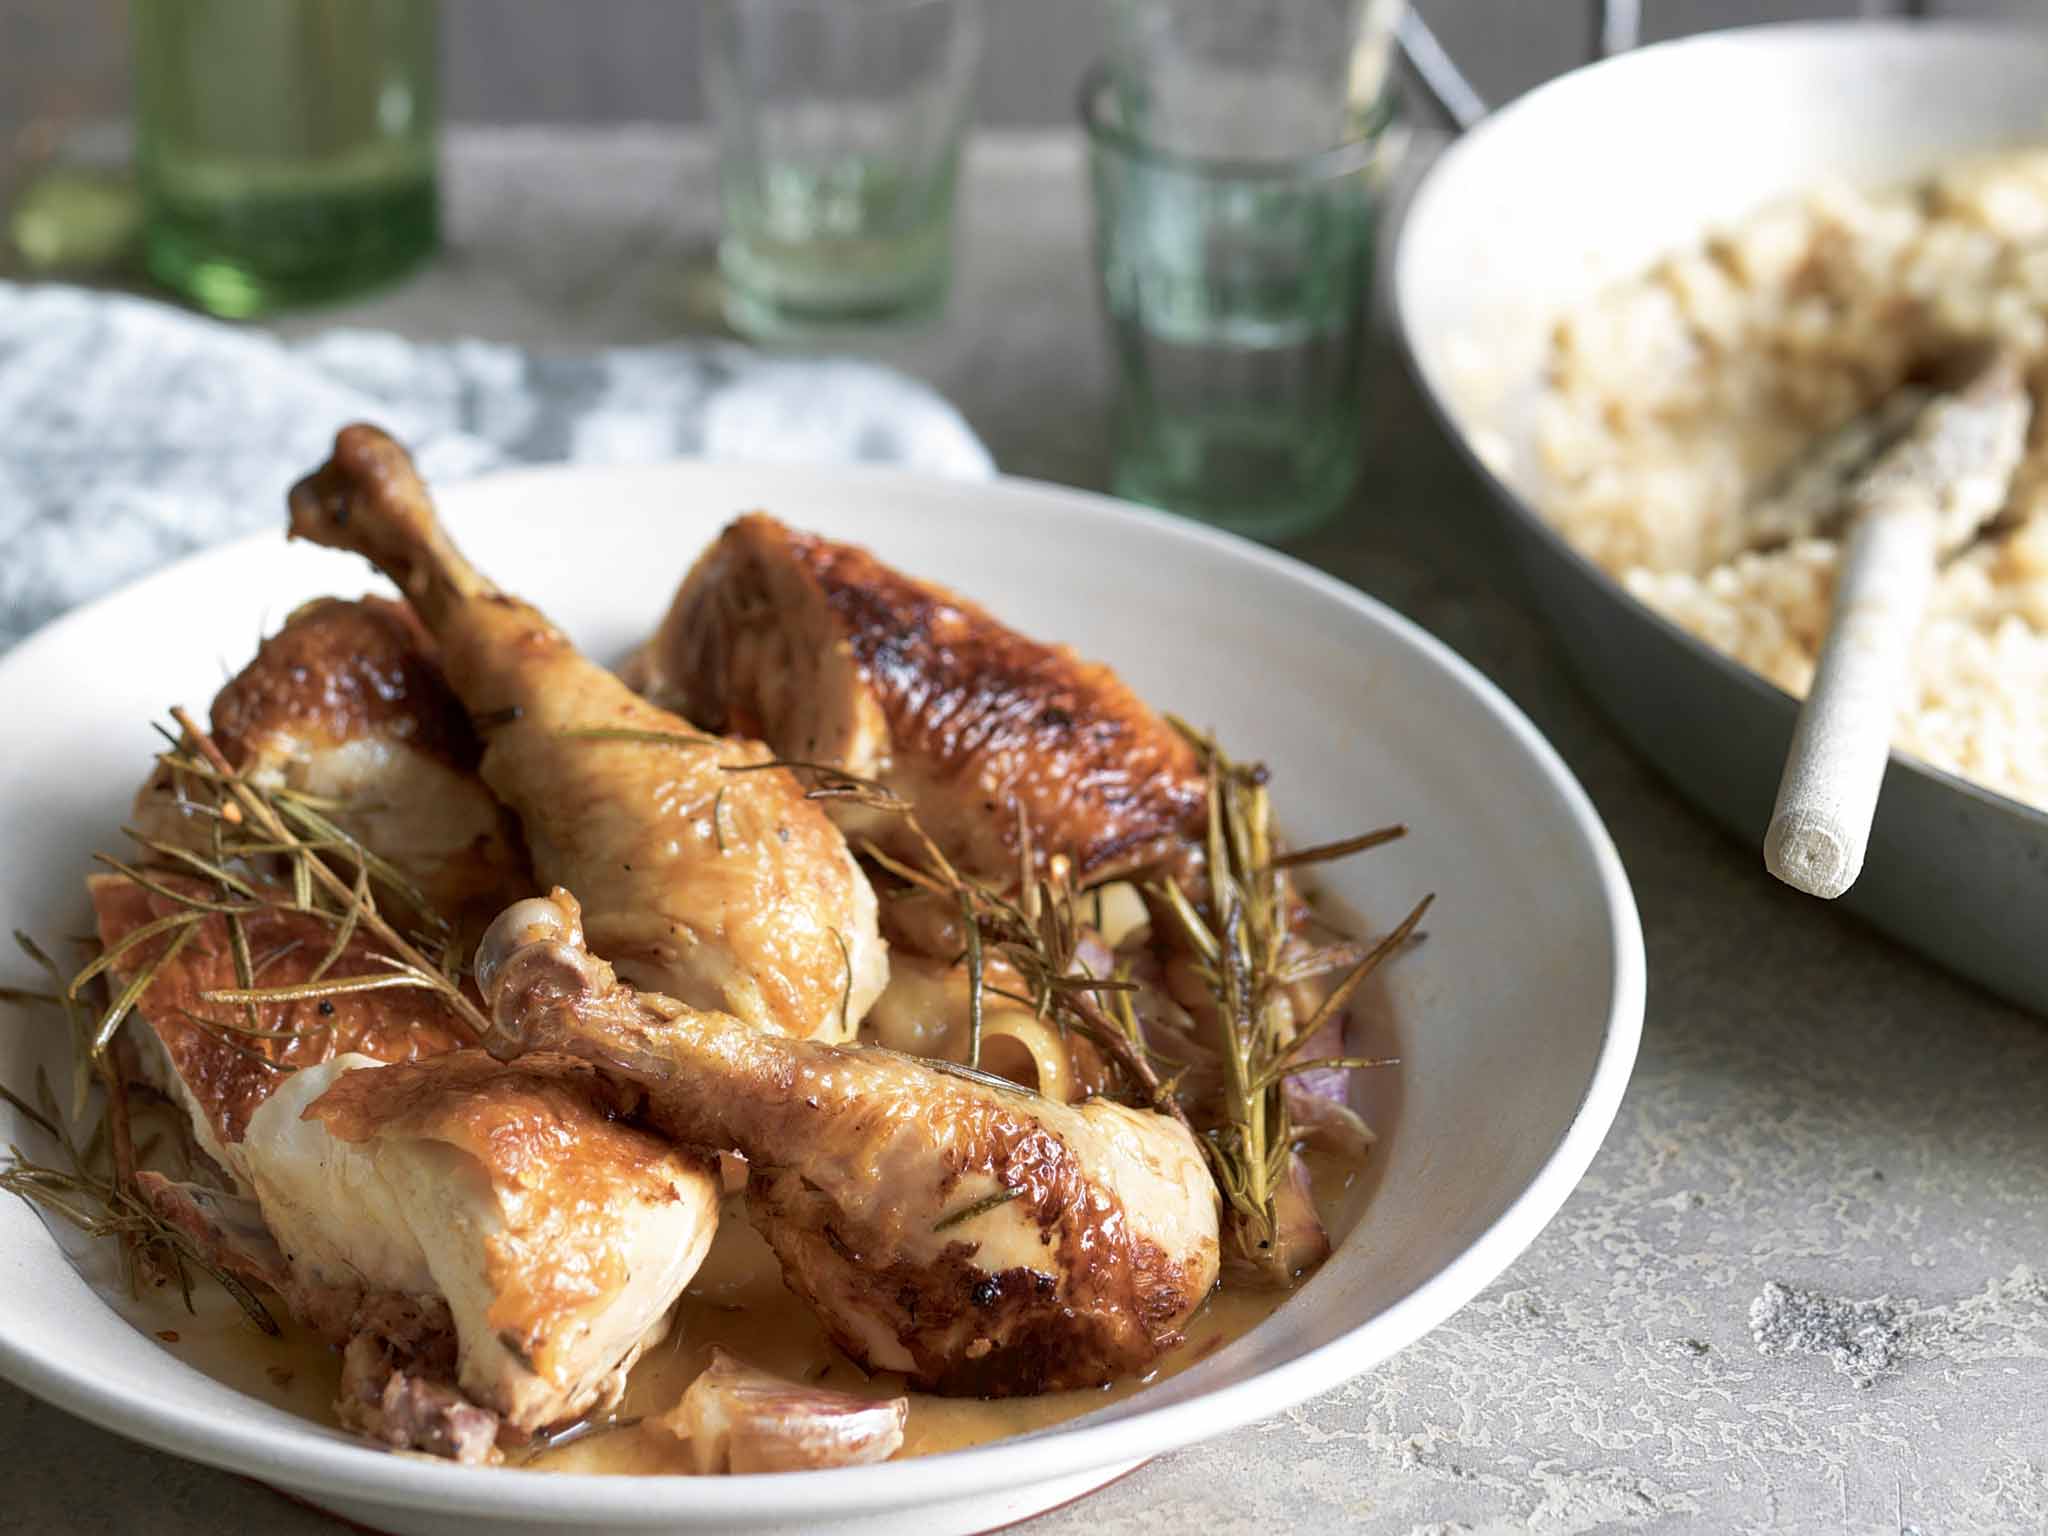 Bill serves his garlicky pot-roasted chicken with a porcini risotto stirred through